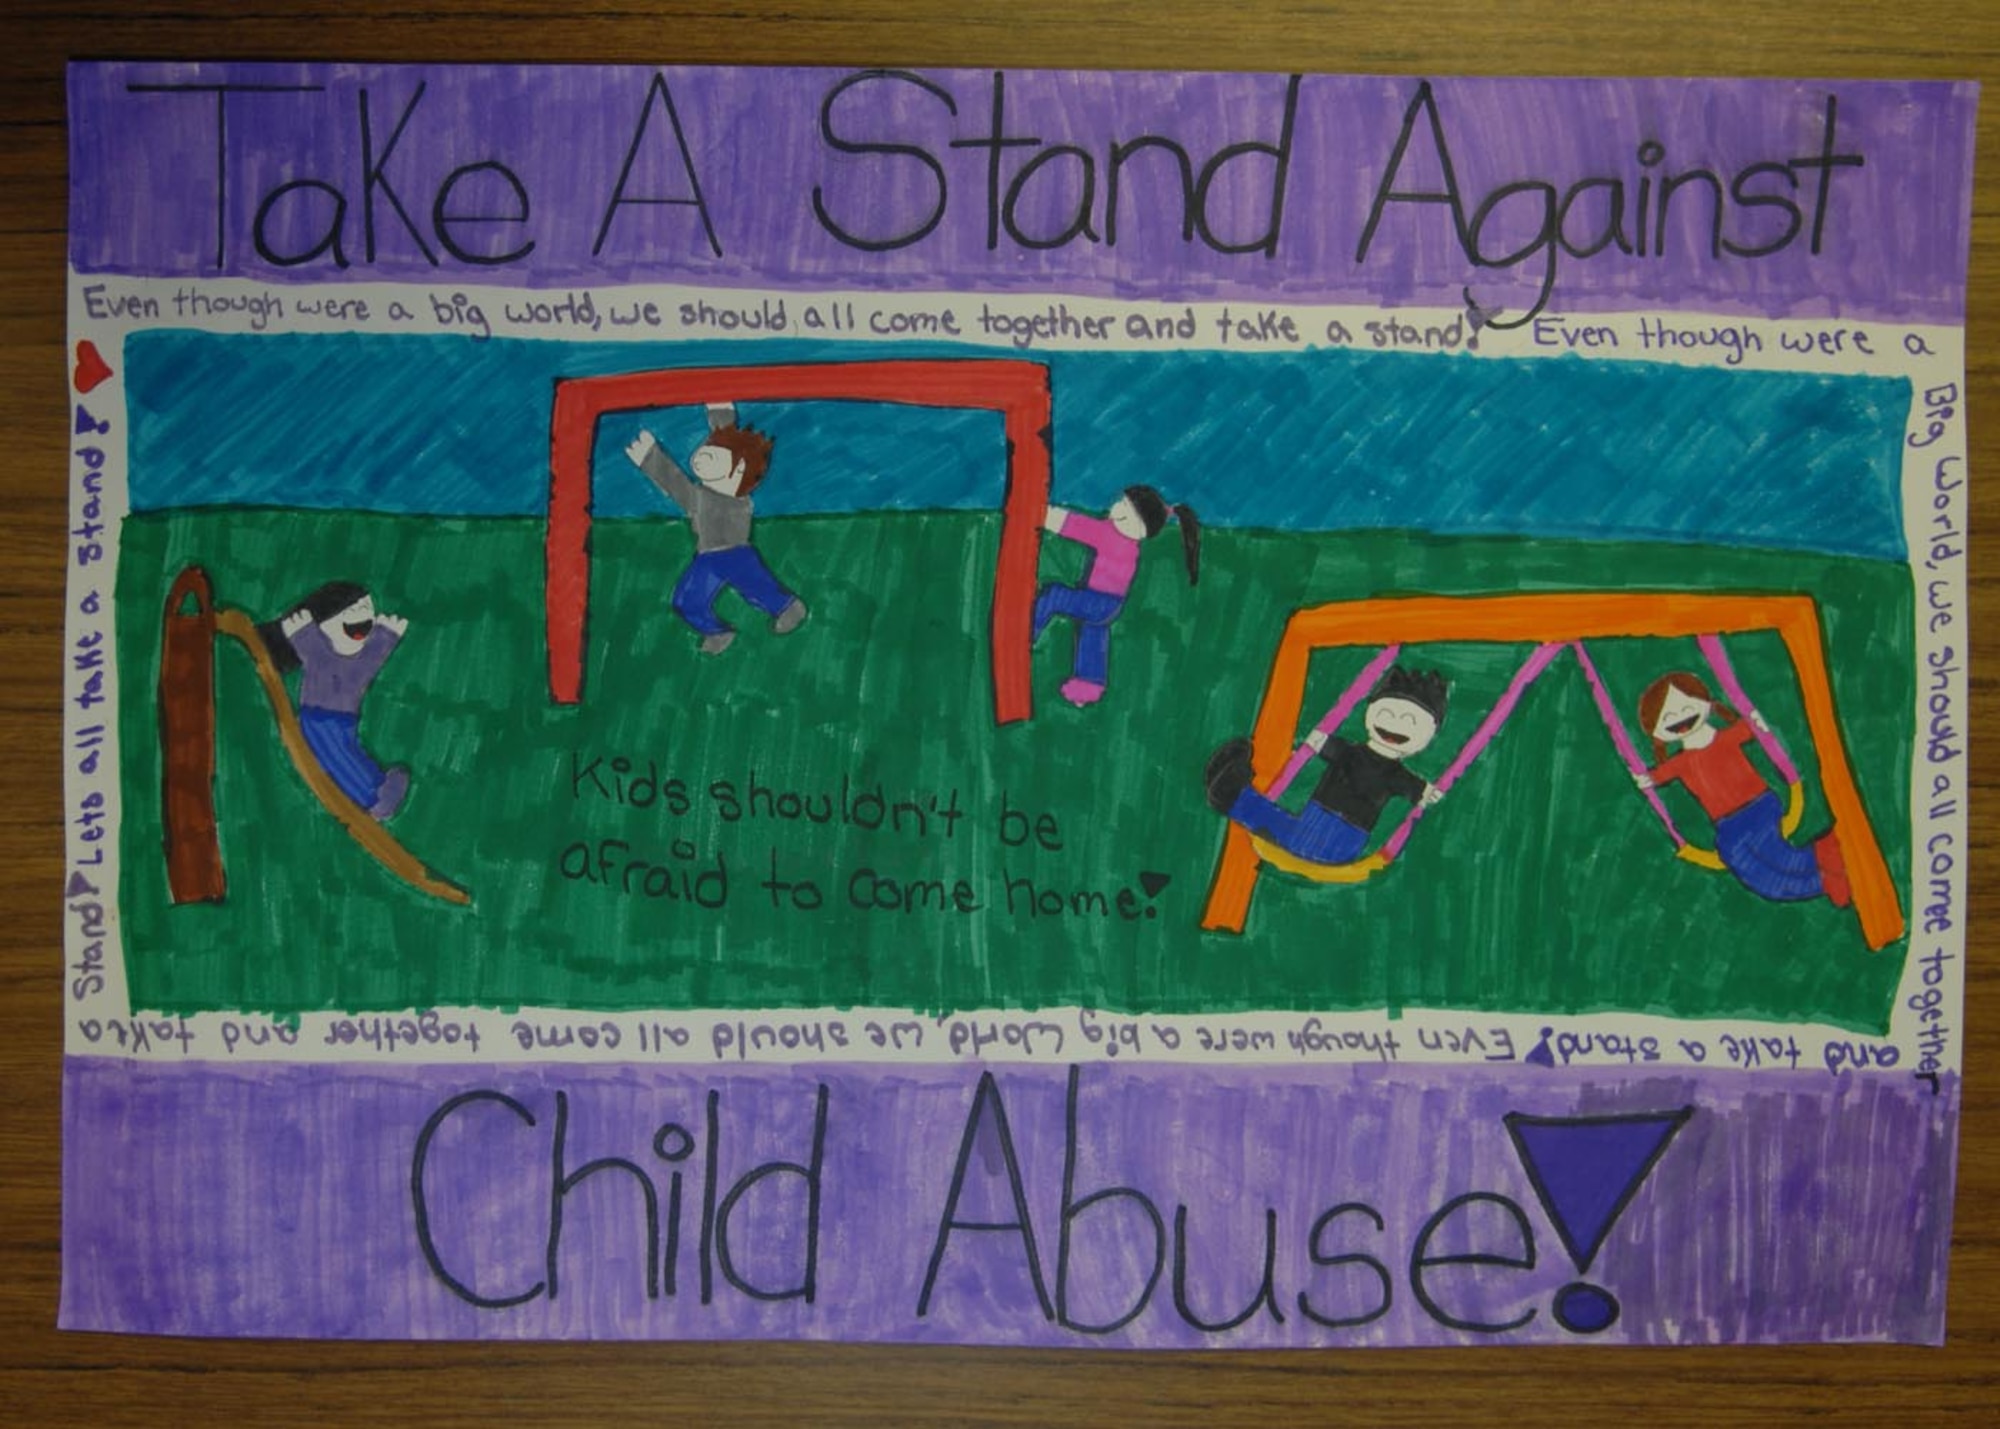 The winning poster, made by Celeste Vasquez from the Child Abuse prevention contest. 